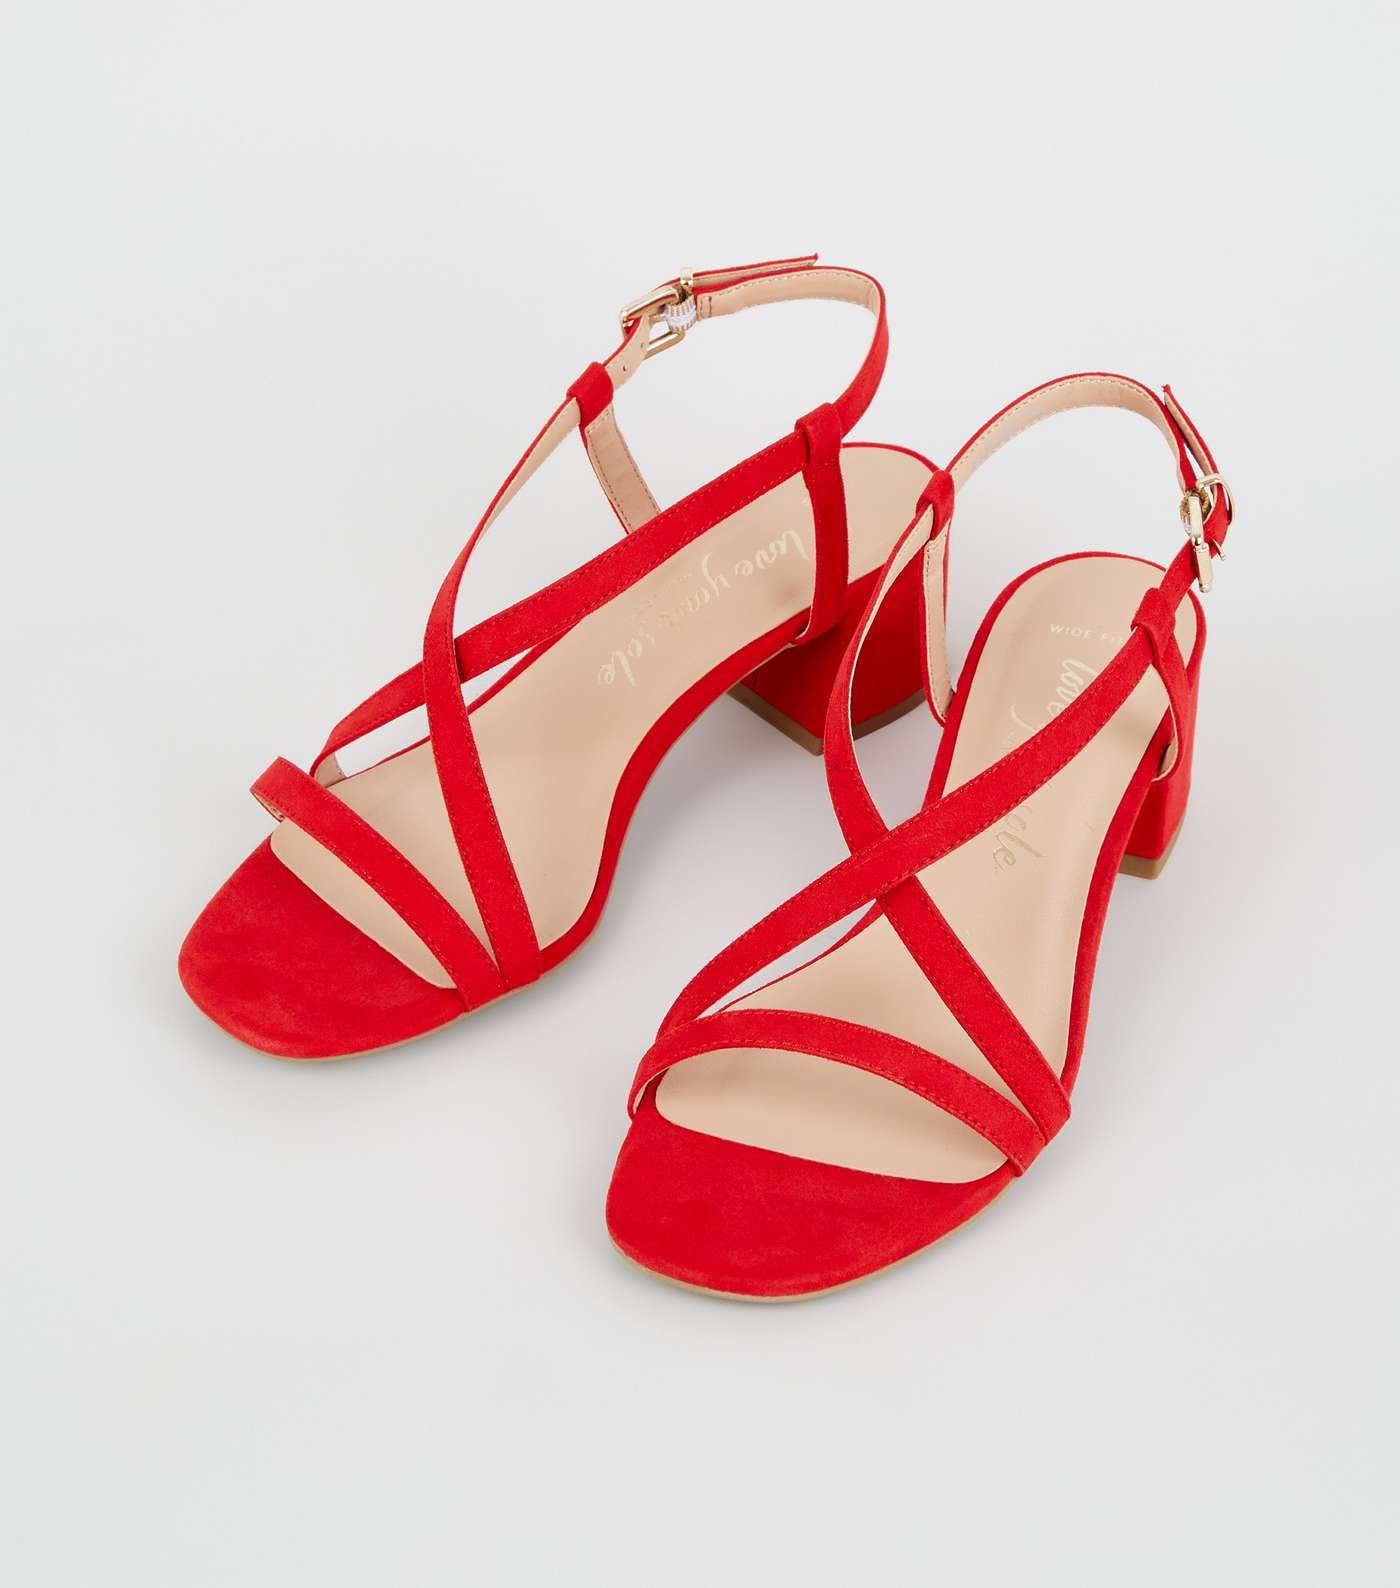 Wide Fit Red Suedette Strappy Low Heel Sandals Image 4